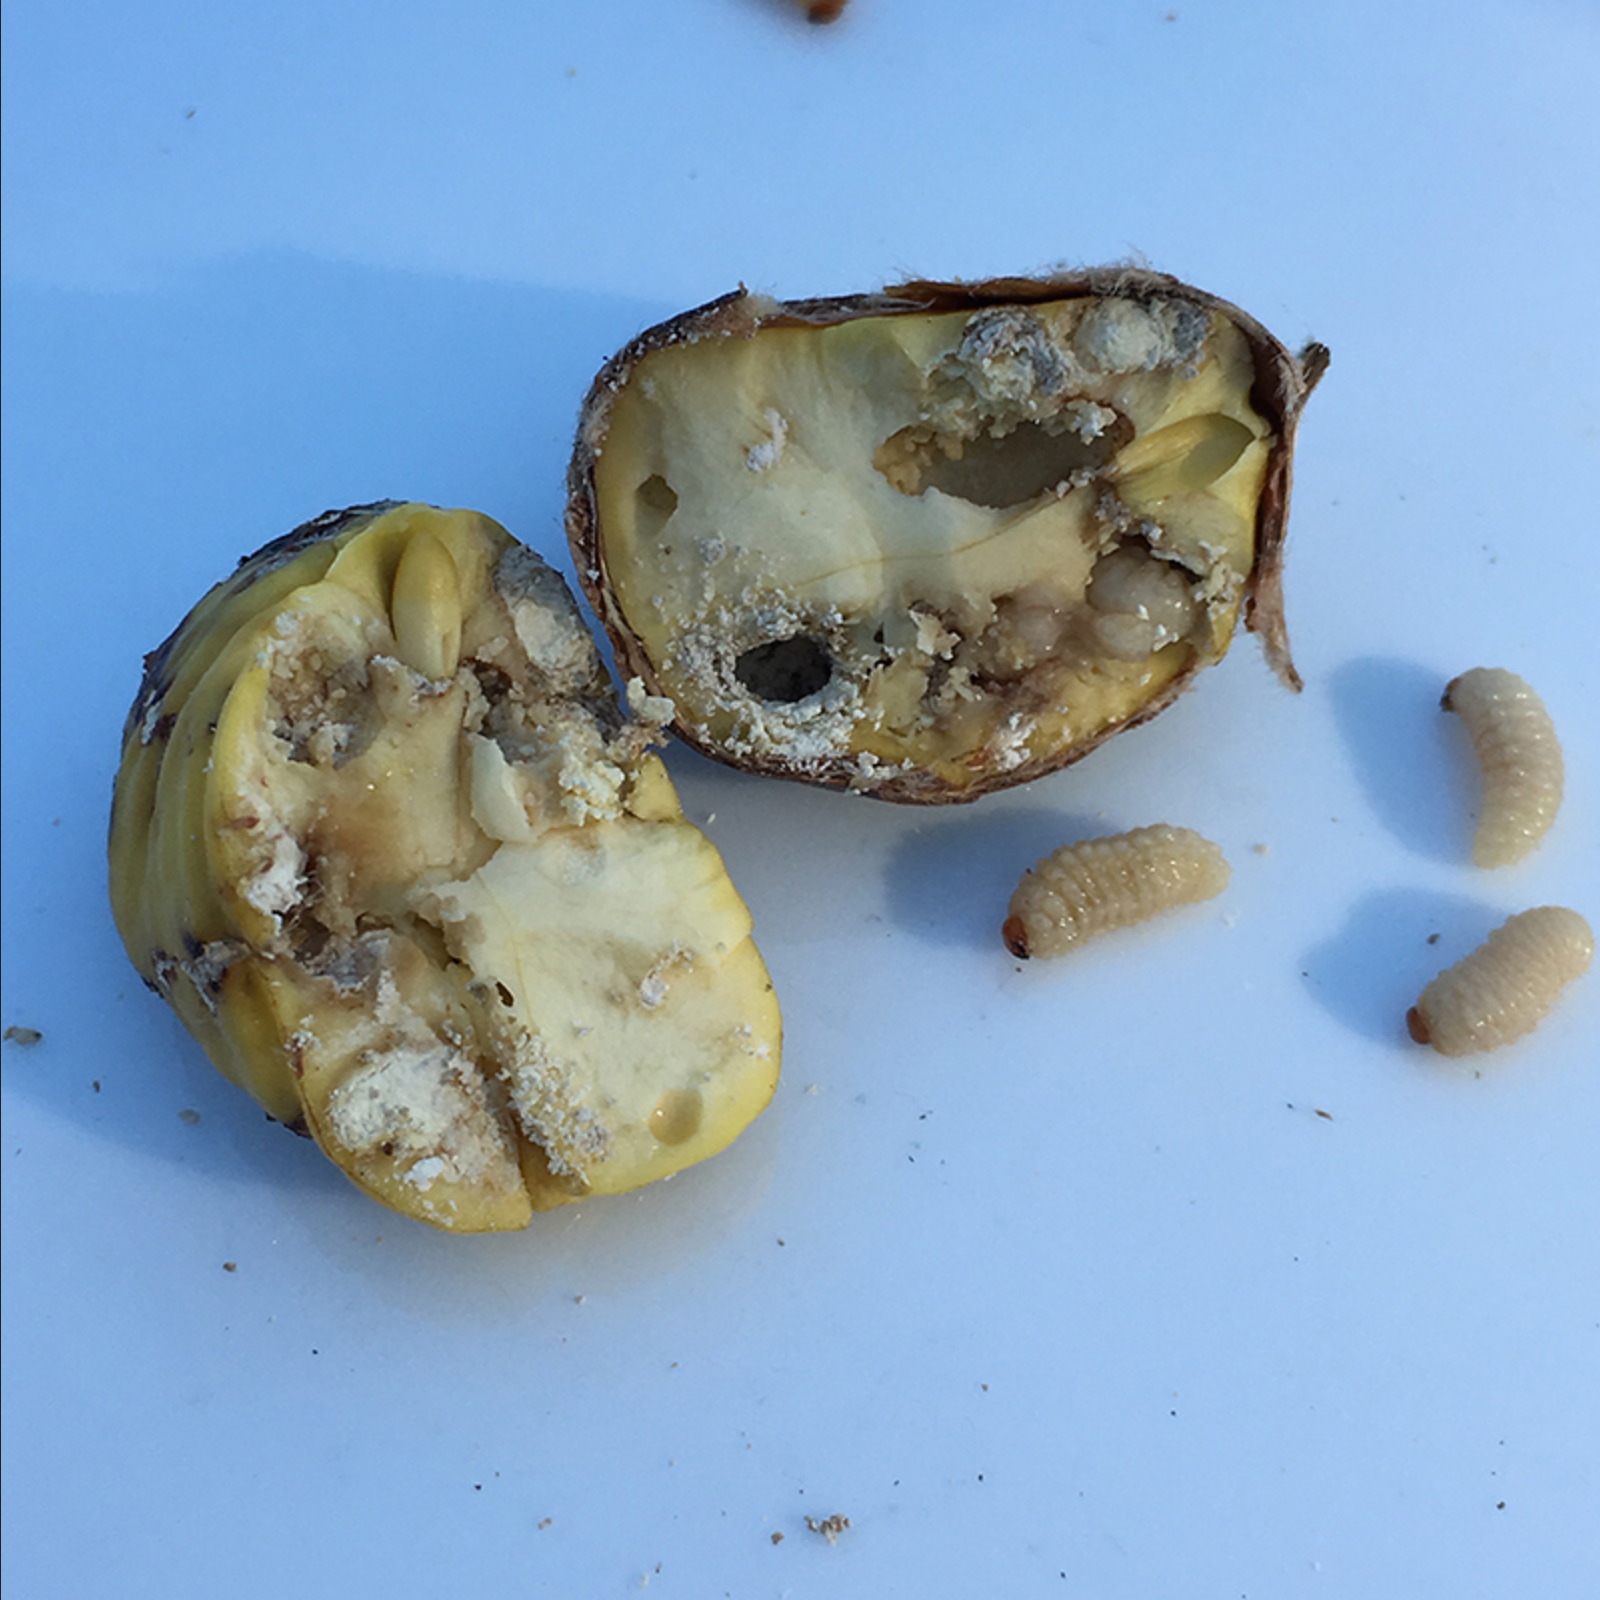 Larvae found in each infested nut